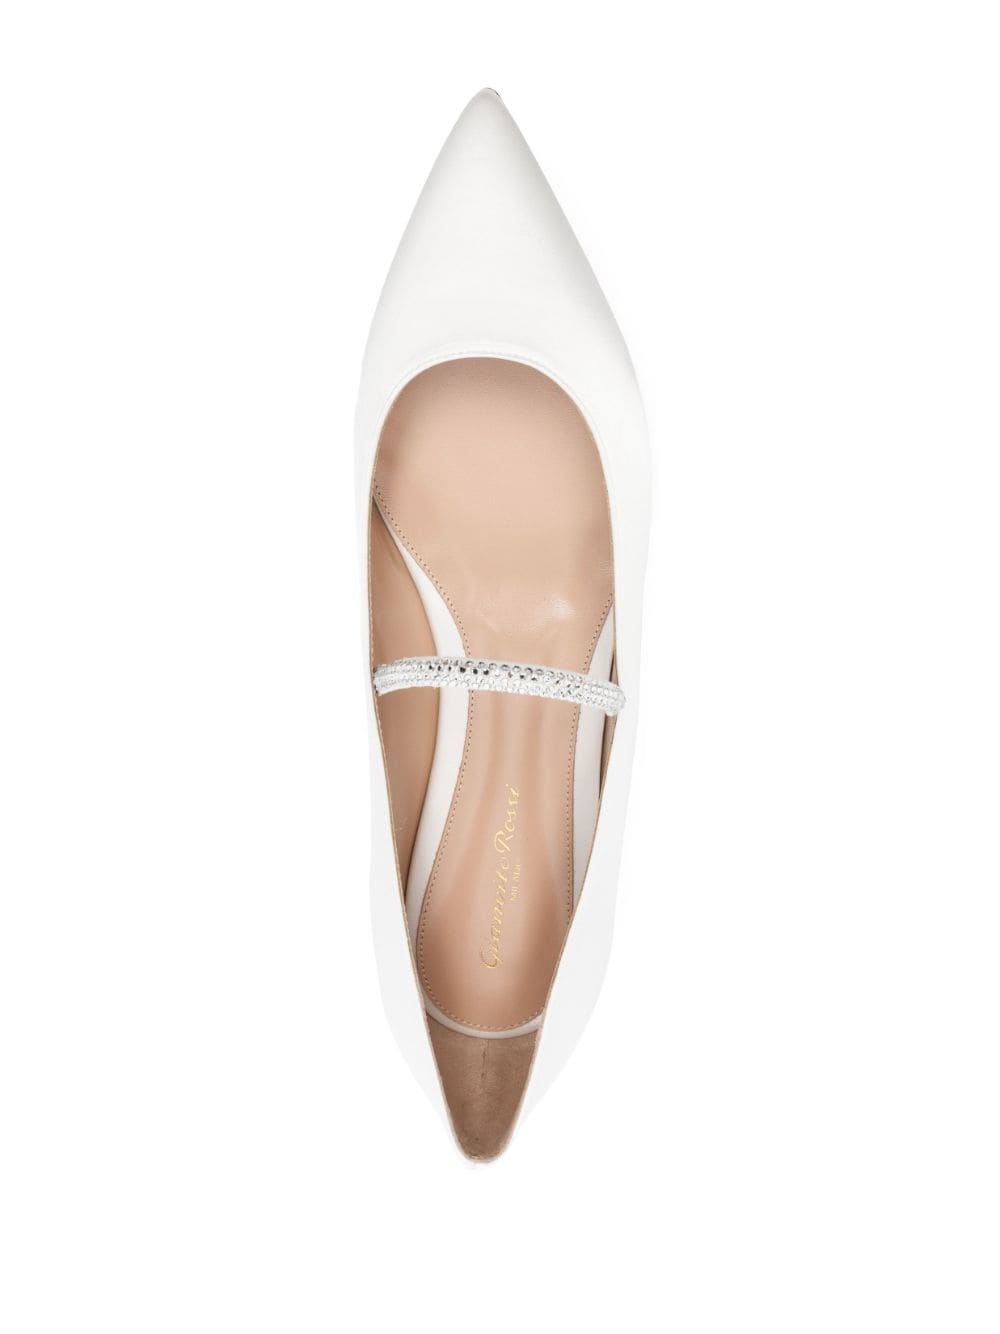 pointed-toe flat ballerina shoes - 4